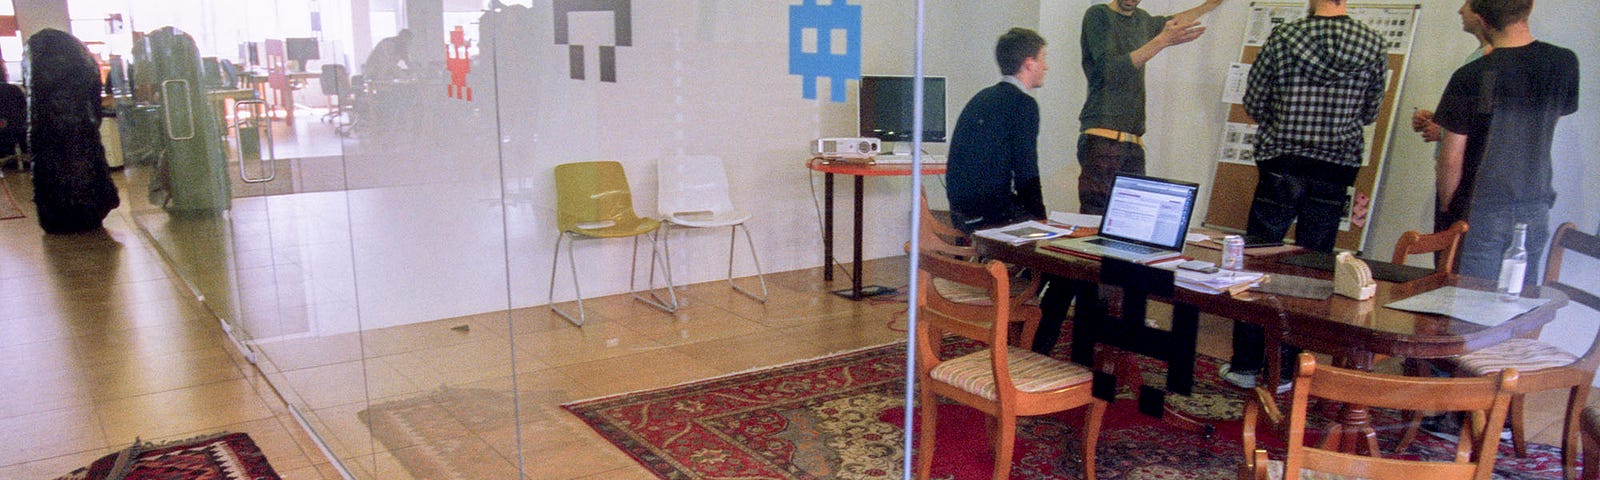 Startup team collaborating at The Trampery Bevenden Street, 2011